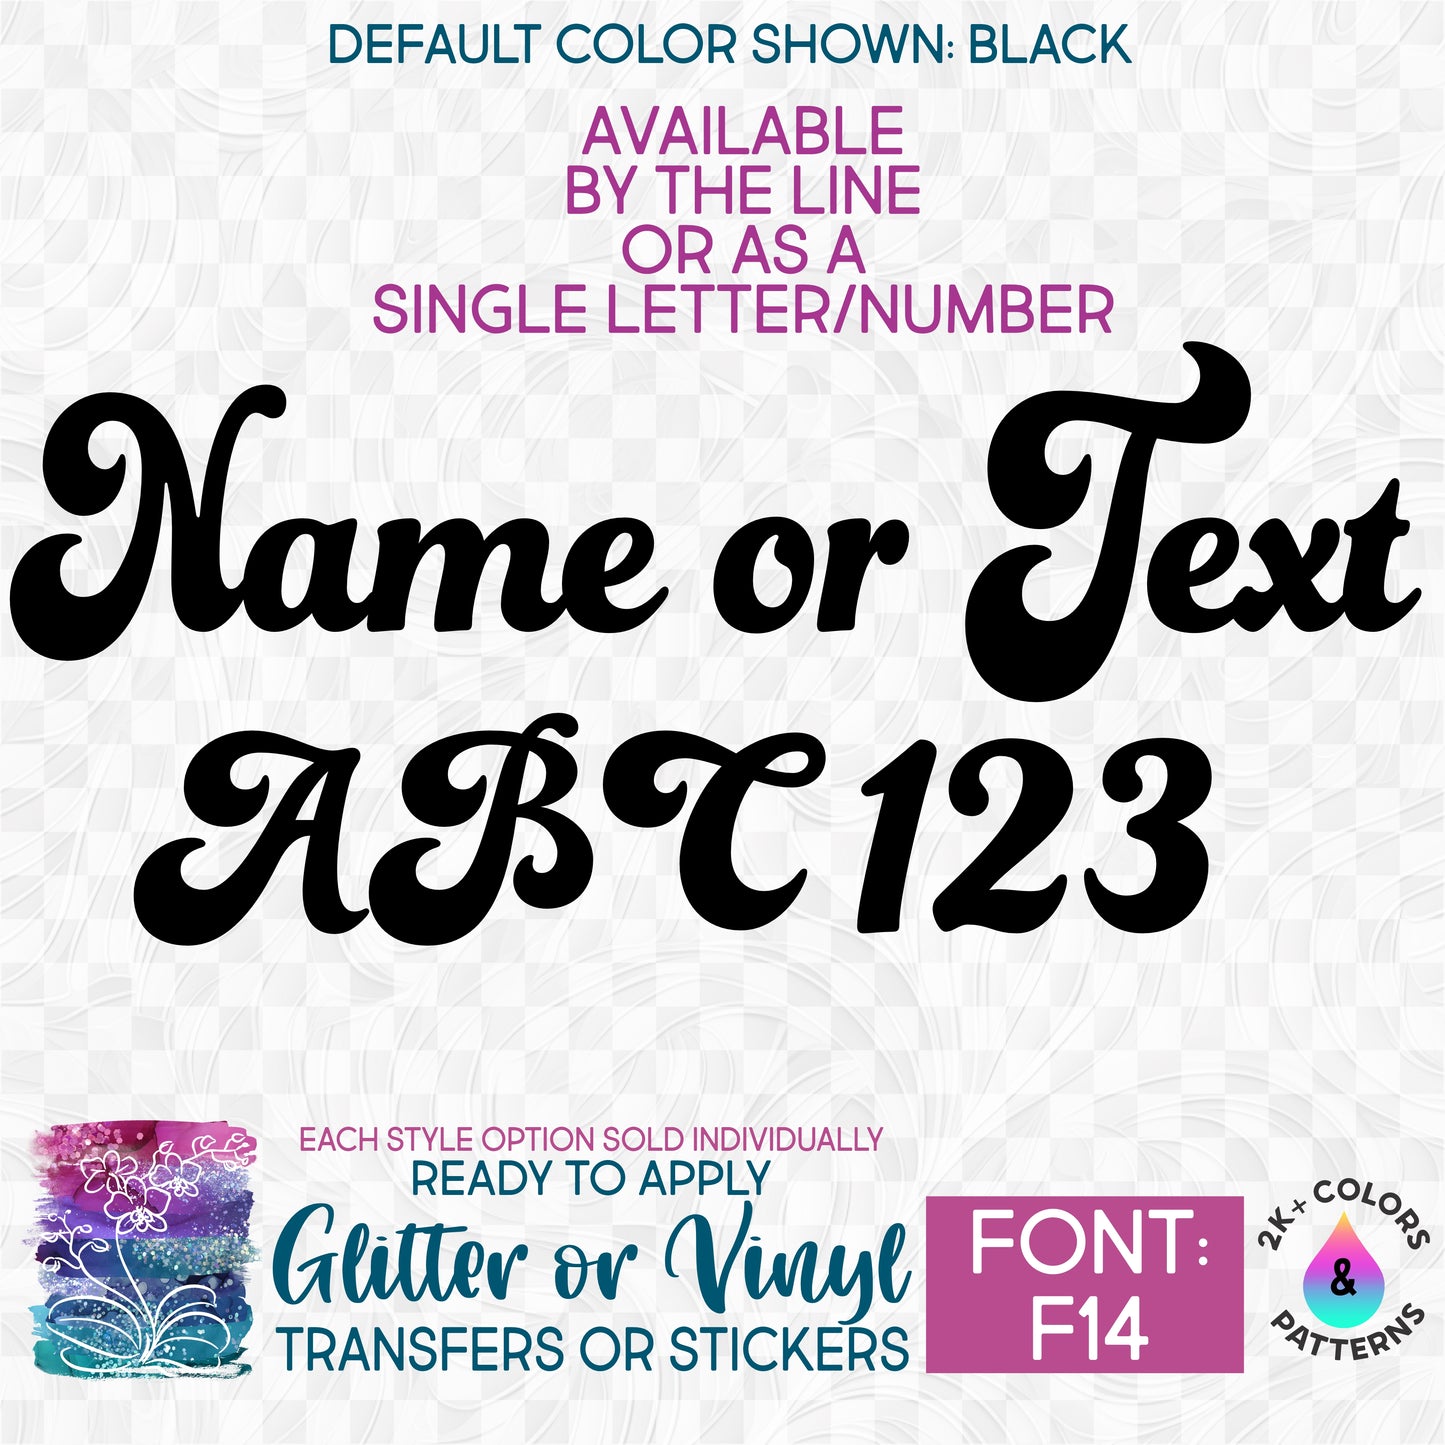 SBS-97-F14 Script Font Custom Lettering Name Text Iron On Transfer or Sticker